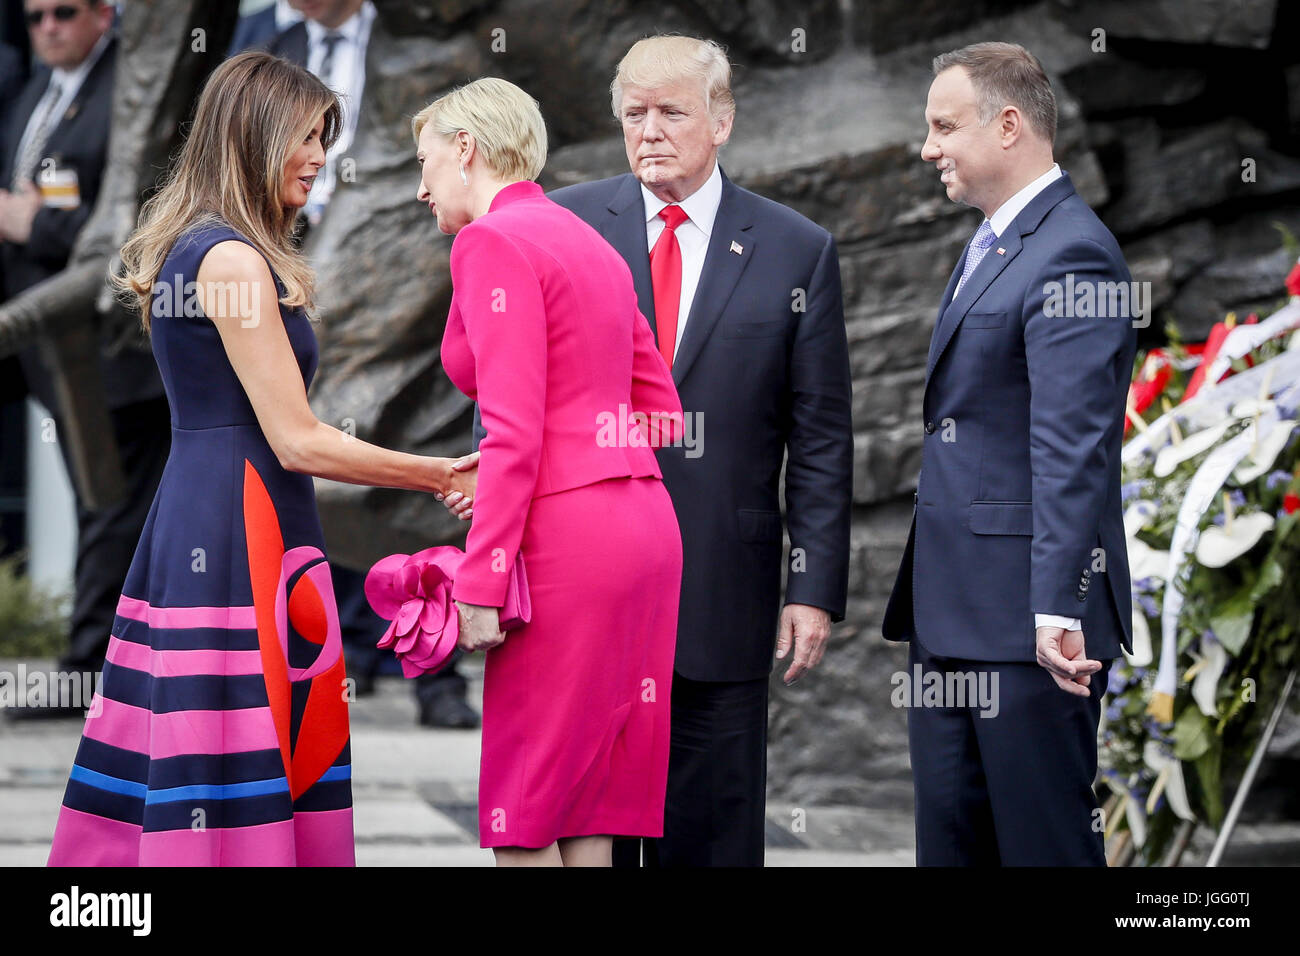 Warsaw, Poland. 06th July, 2017. US president Donald Trump delivers his speech during his state visit on July 6, 2017 at the Krasinski Square in Warsaw, Poland. In the picture: Melania Trump, Agata Kornhauser-Duda, Andrzej Duda, Donald Trump Credit: East News sp. z o.o./Alamy Live News Stock Photo